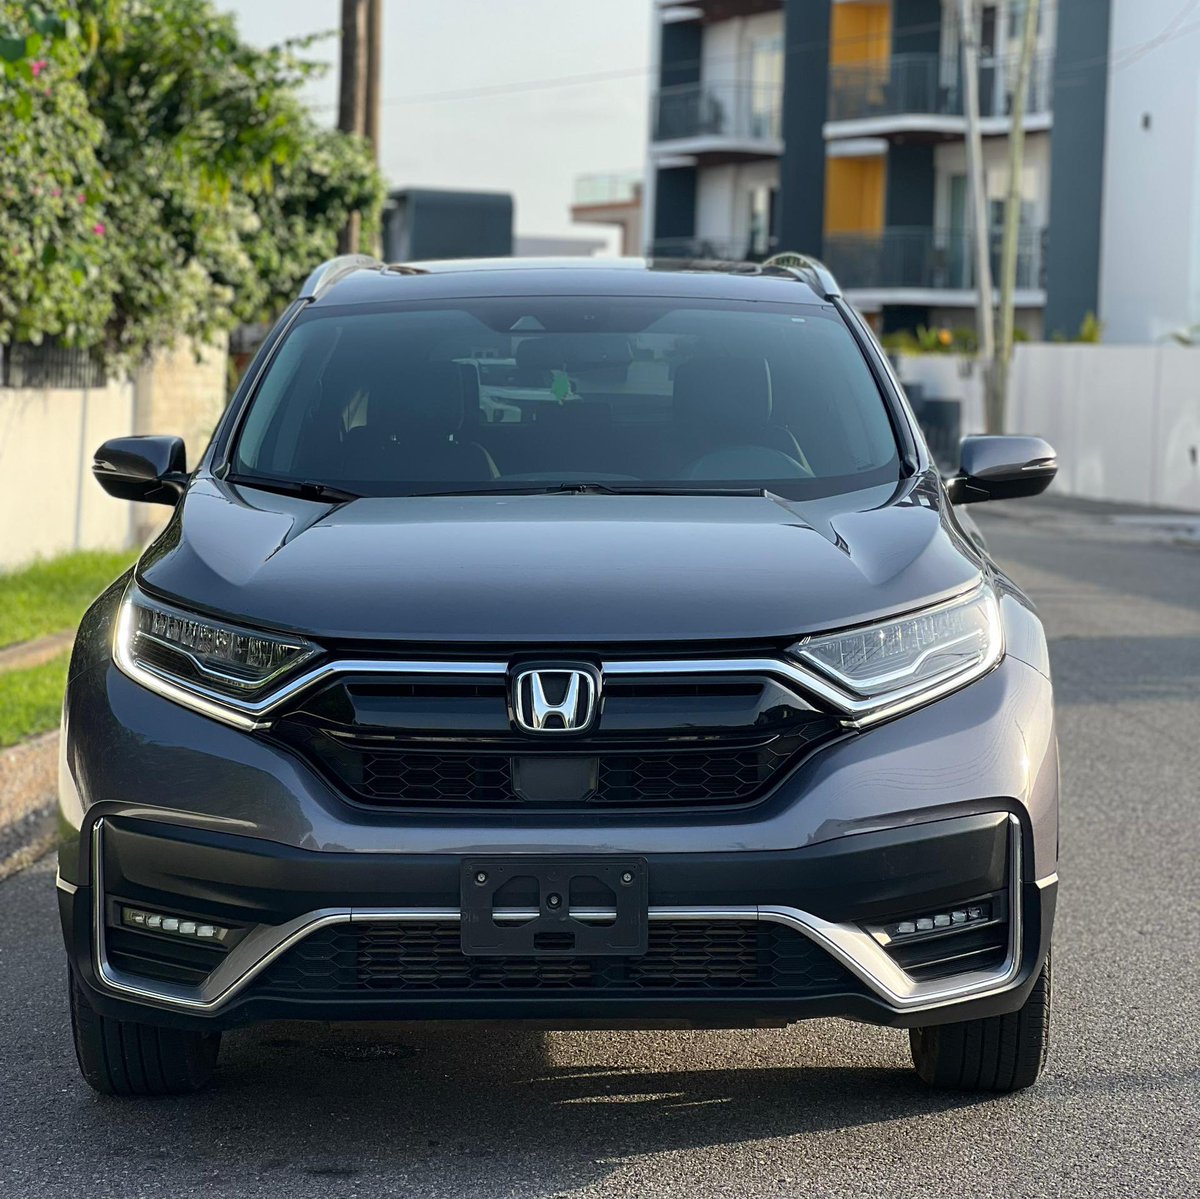 2020 Honda CRV Touring AWD 1.5T engine 18k miles Remote Keyless Entry Keyless ignition leather interior Wireless charging pad Panoramic roof Apple Carplay and Android Auto Collision Mitigation Braking System Lane Keeping Assist System Blindspot Monitoring Price - 415k p3 😁